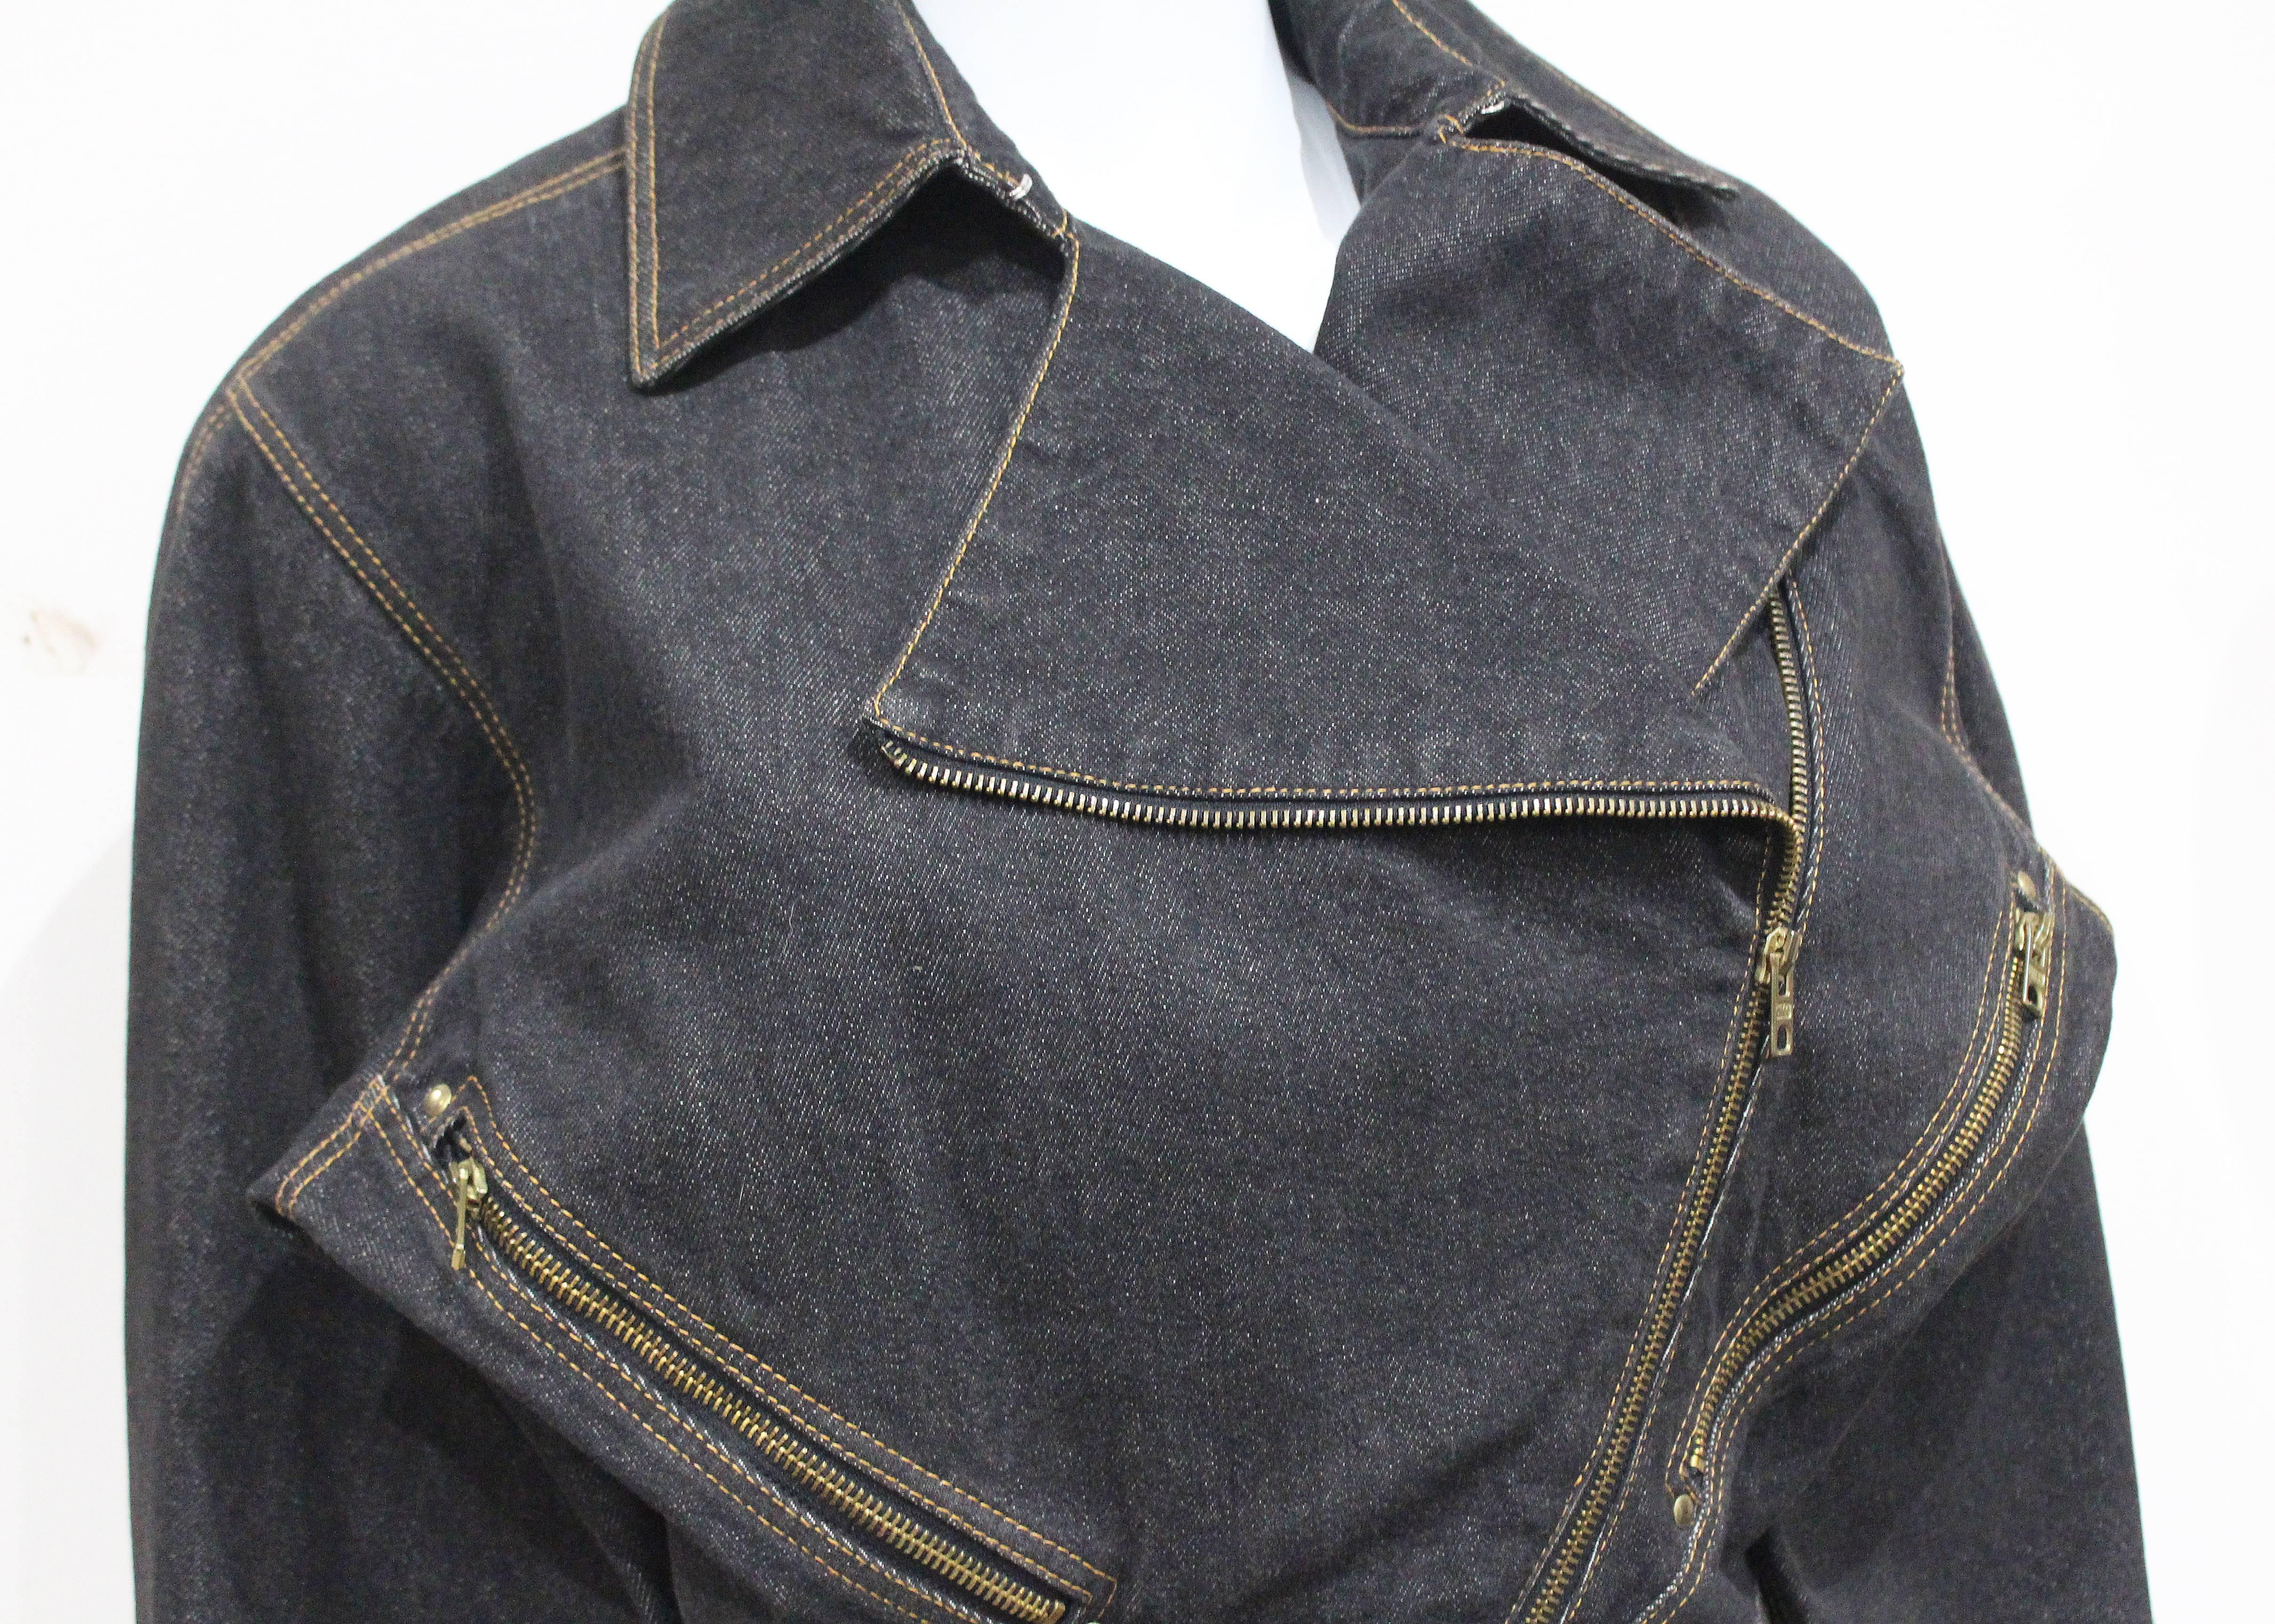 An Alaia motorcycle jacket from the 1980s, in a stone-wash grey denim.

Size: fr 40
Shoulder to shoulder - 18"
Length - 22"
Waist- 28"
Sleeve length - 21" 
Bust - 21"